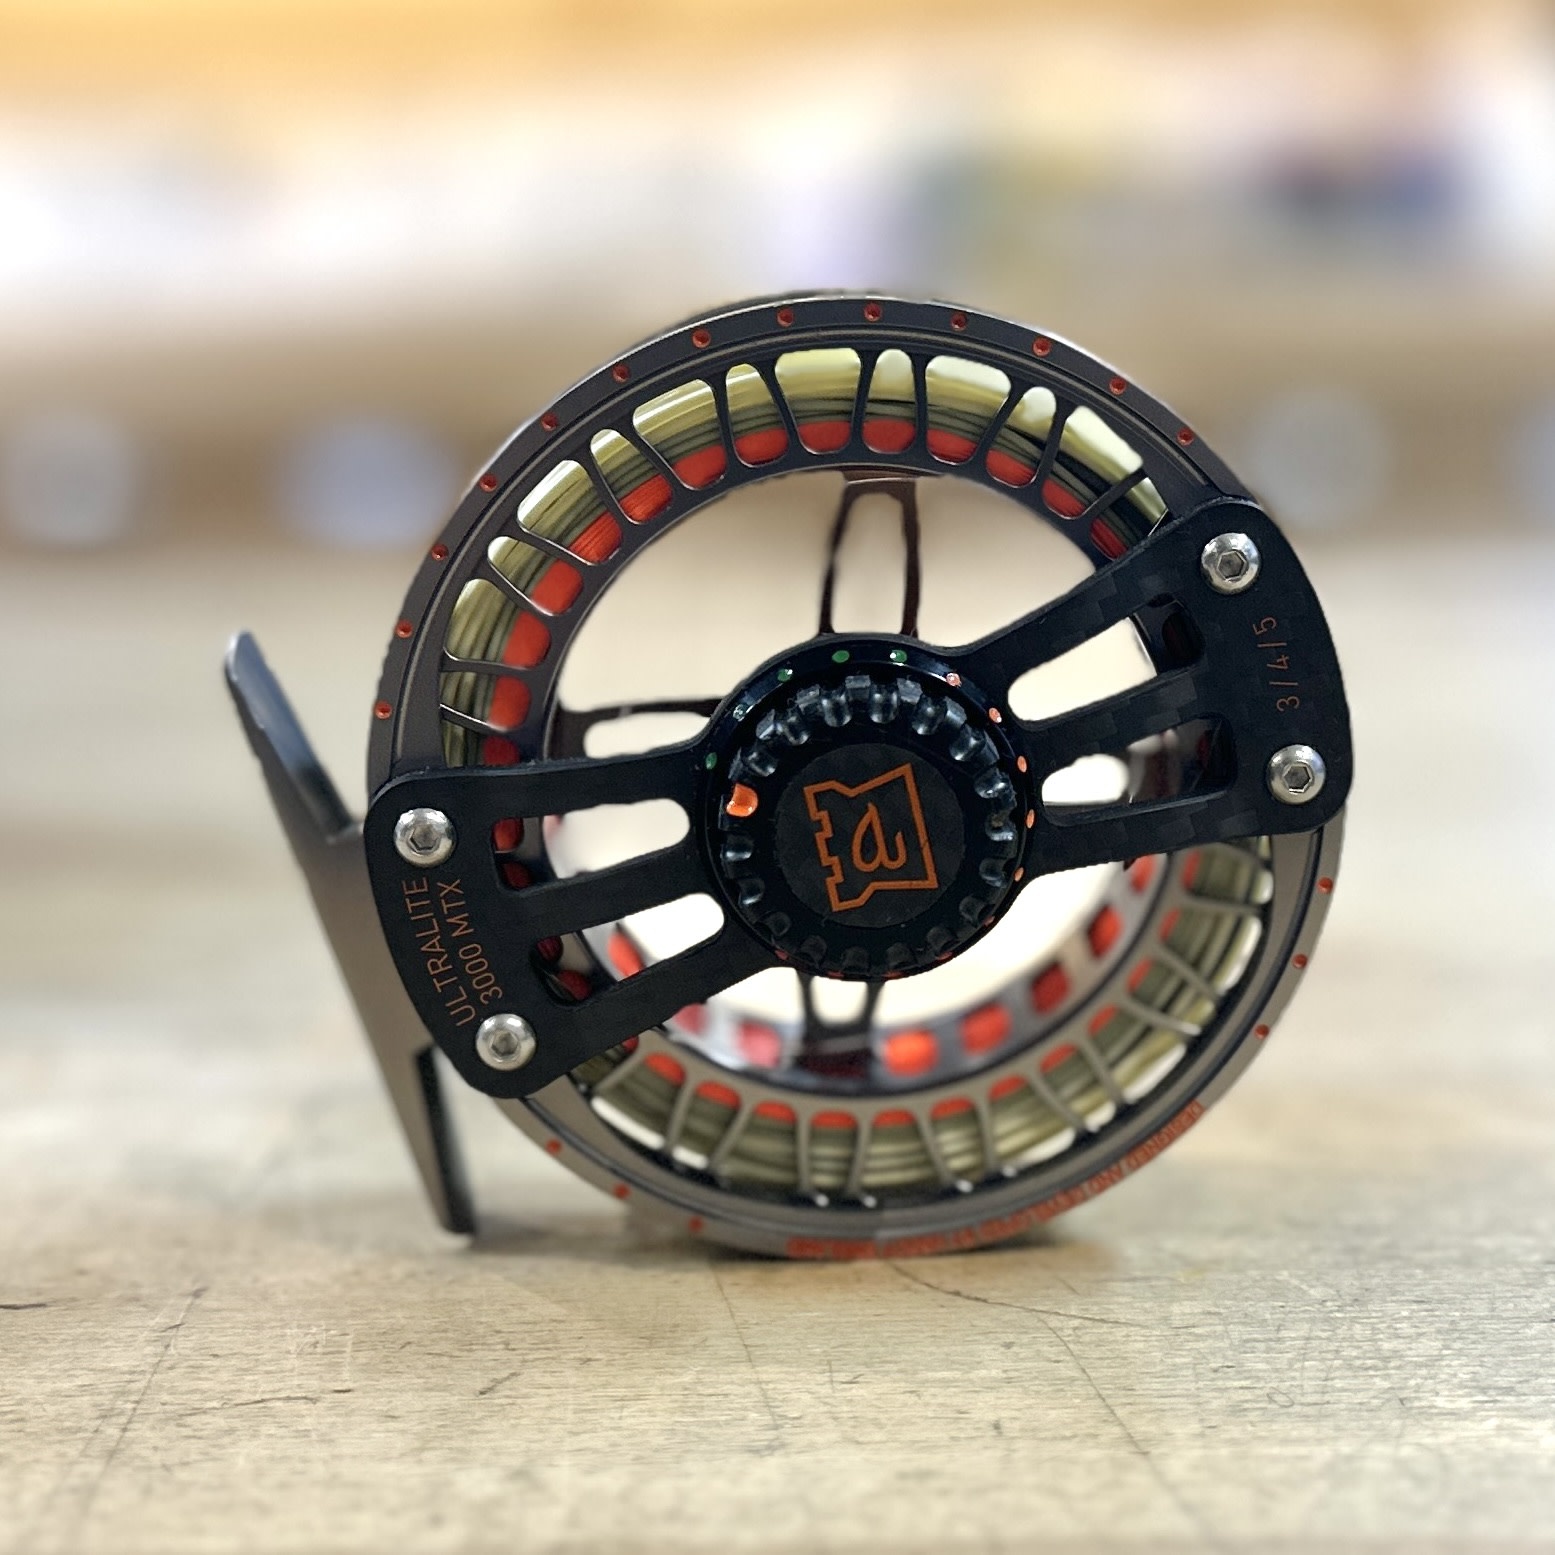 Hardy Fly Fishing - Our brand new MTX Reel has been recomended by